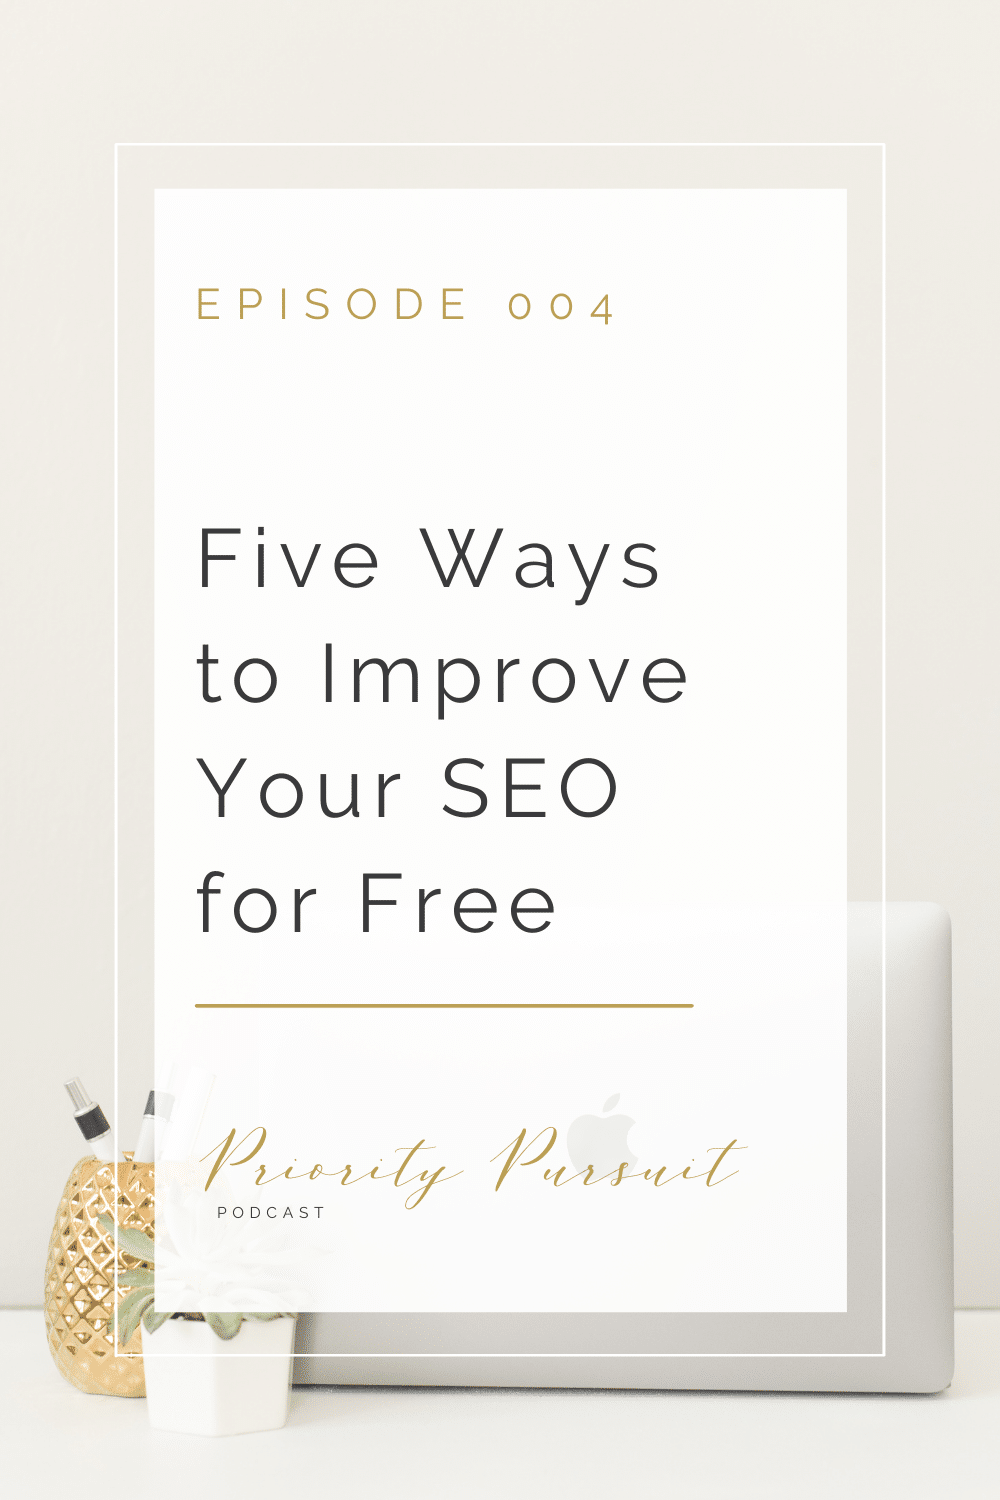 Episode 004 of The Priority Pursuit Podcast breaks down five ways photographers and creative entrepreneurs can improve their SEO for free